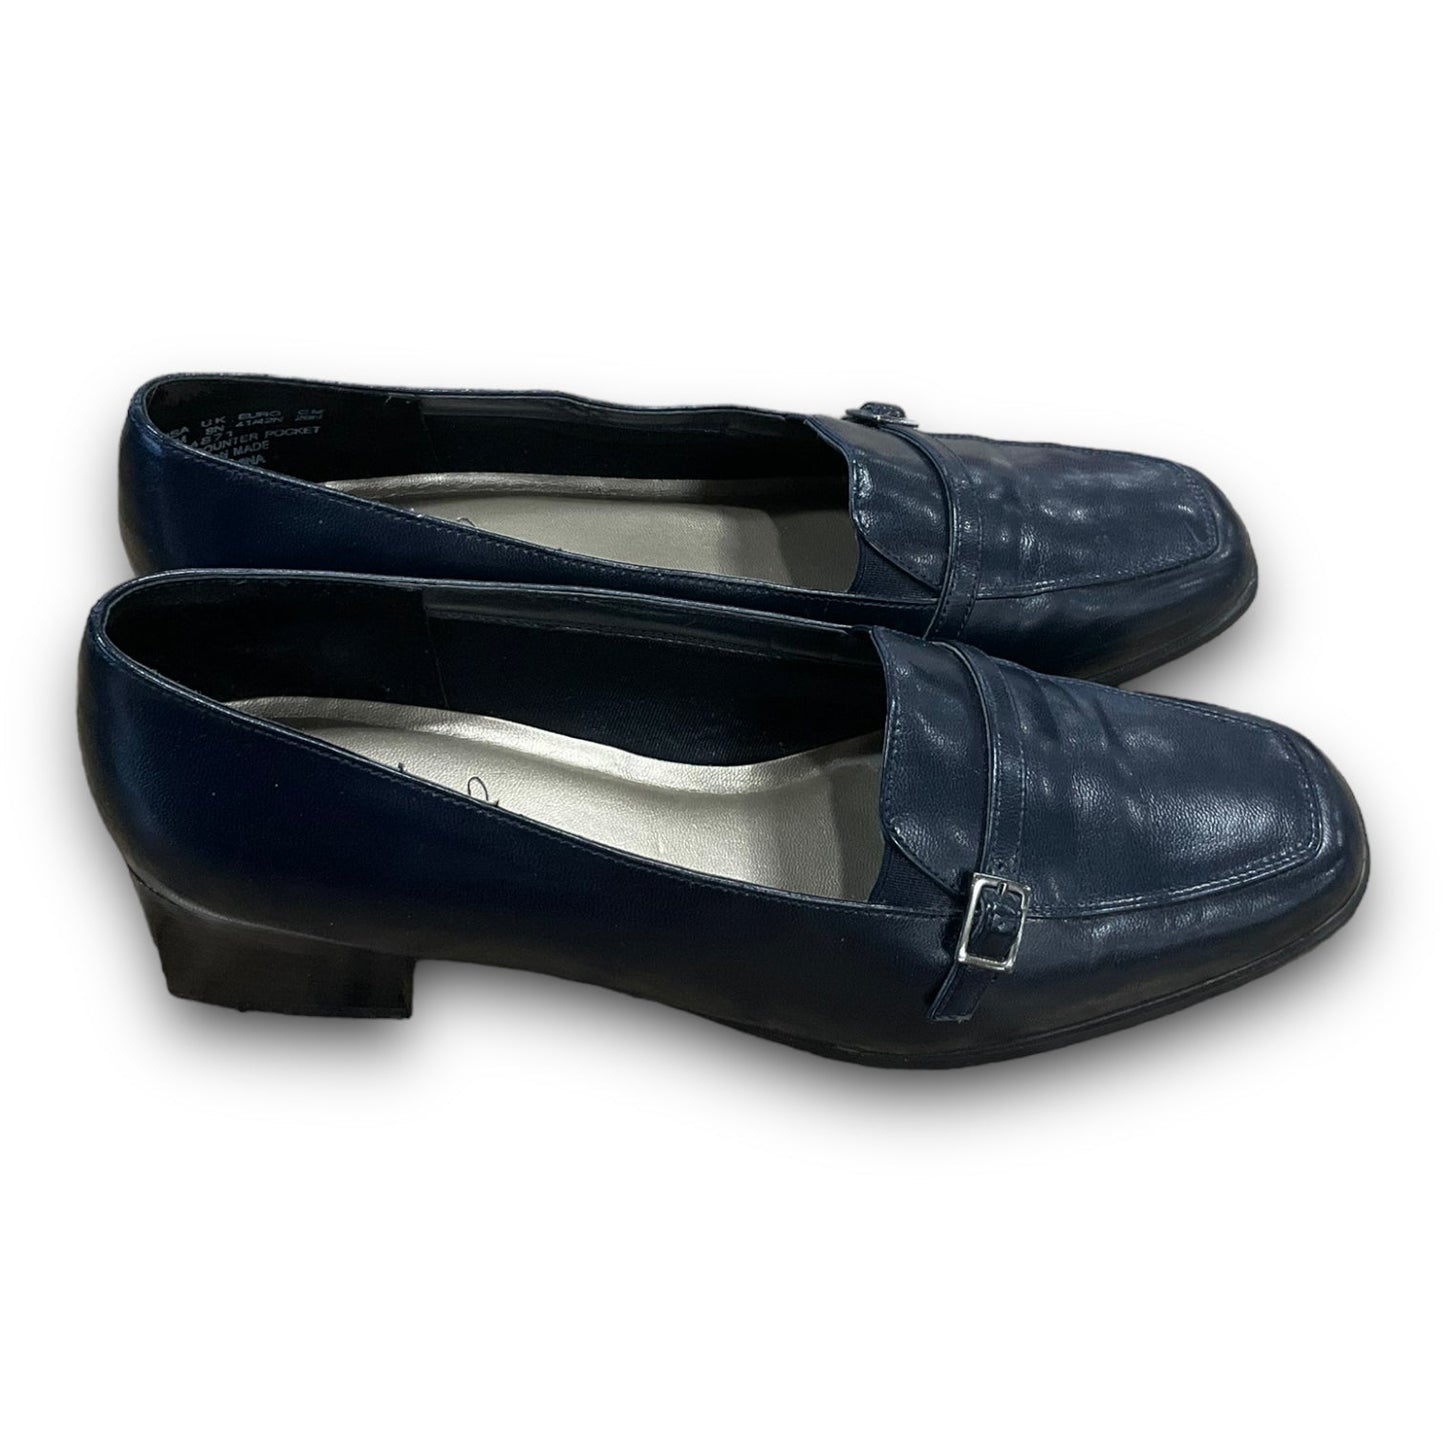 Shoes Flats Loafer Oxford By Clothes Mentor  Size: 10